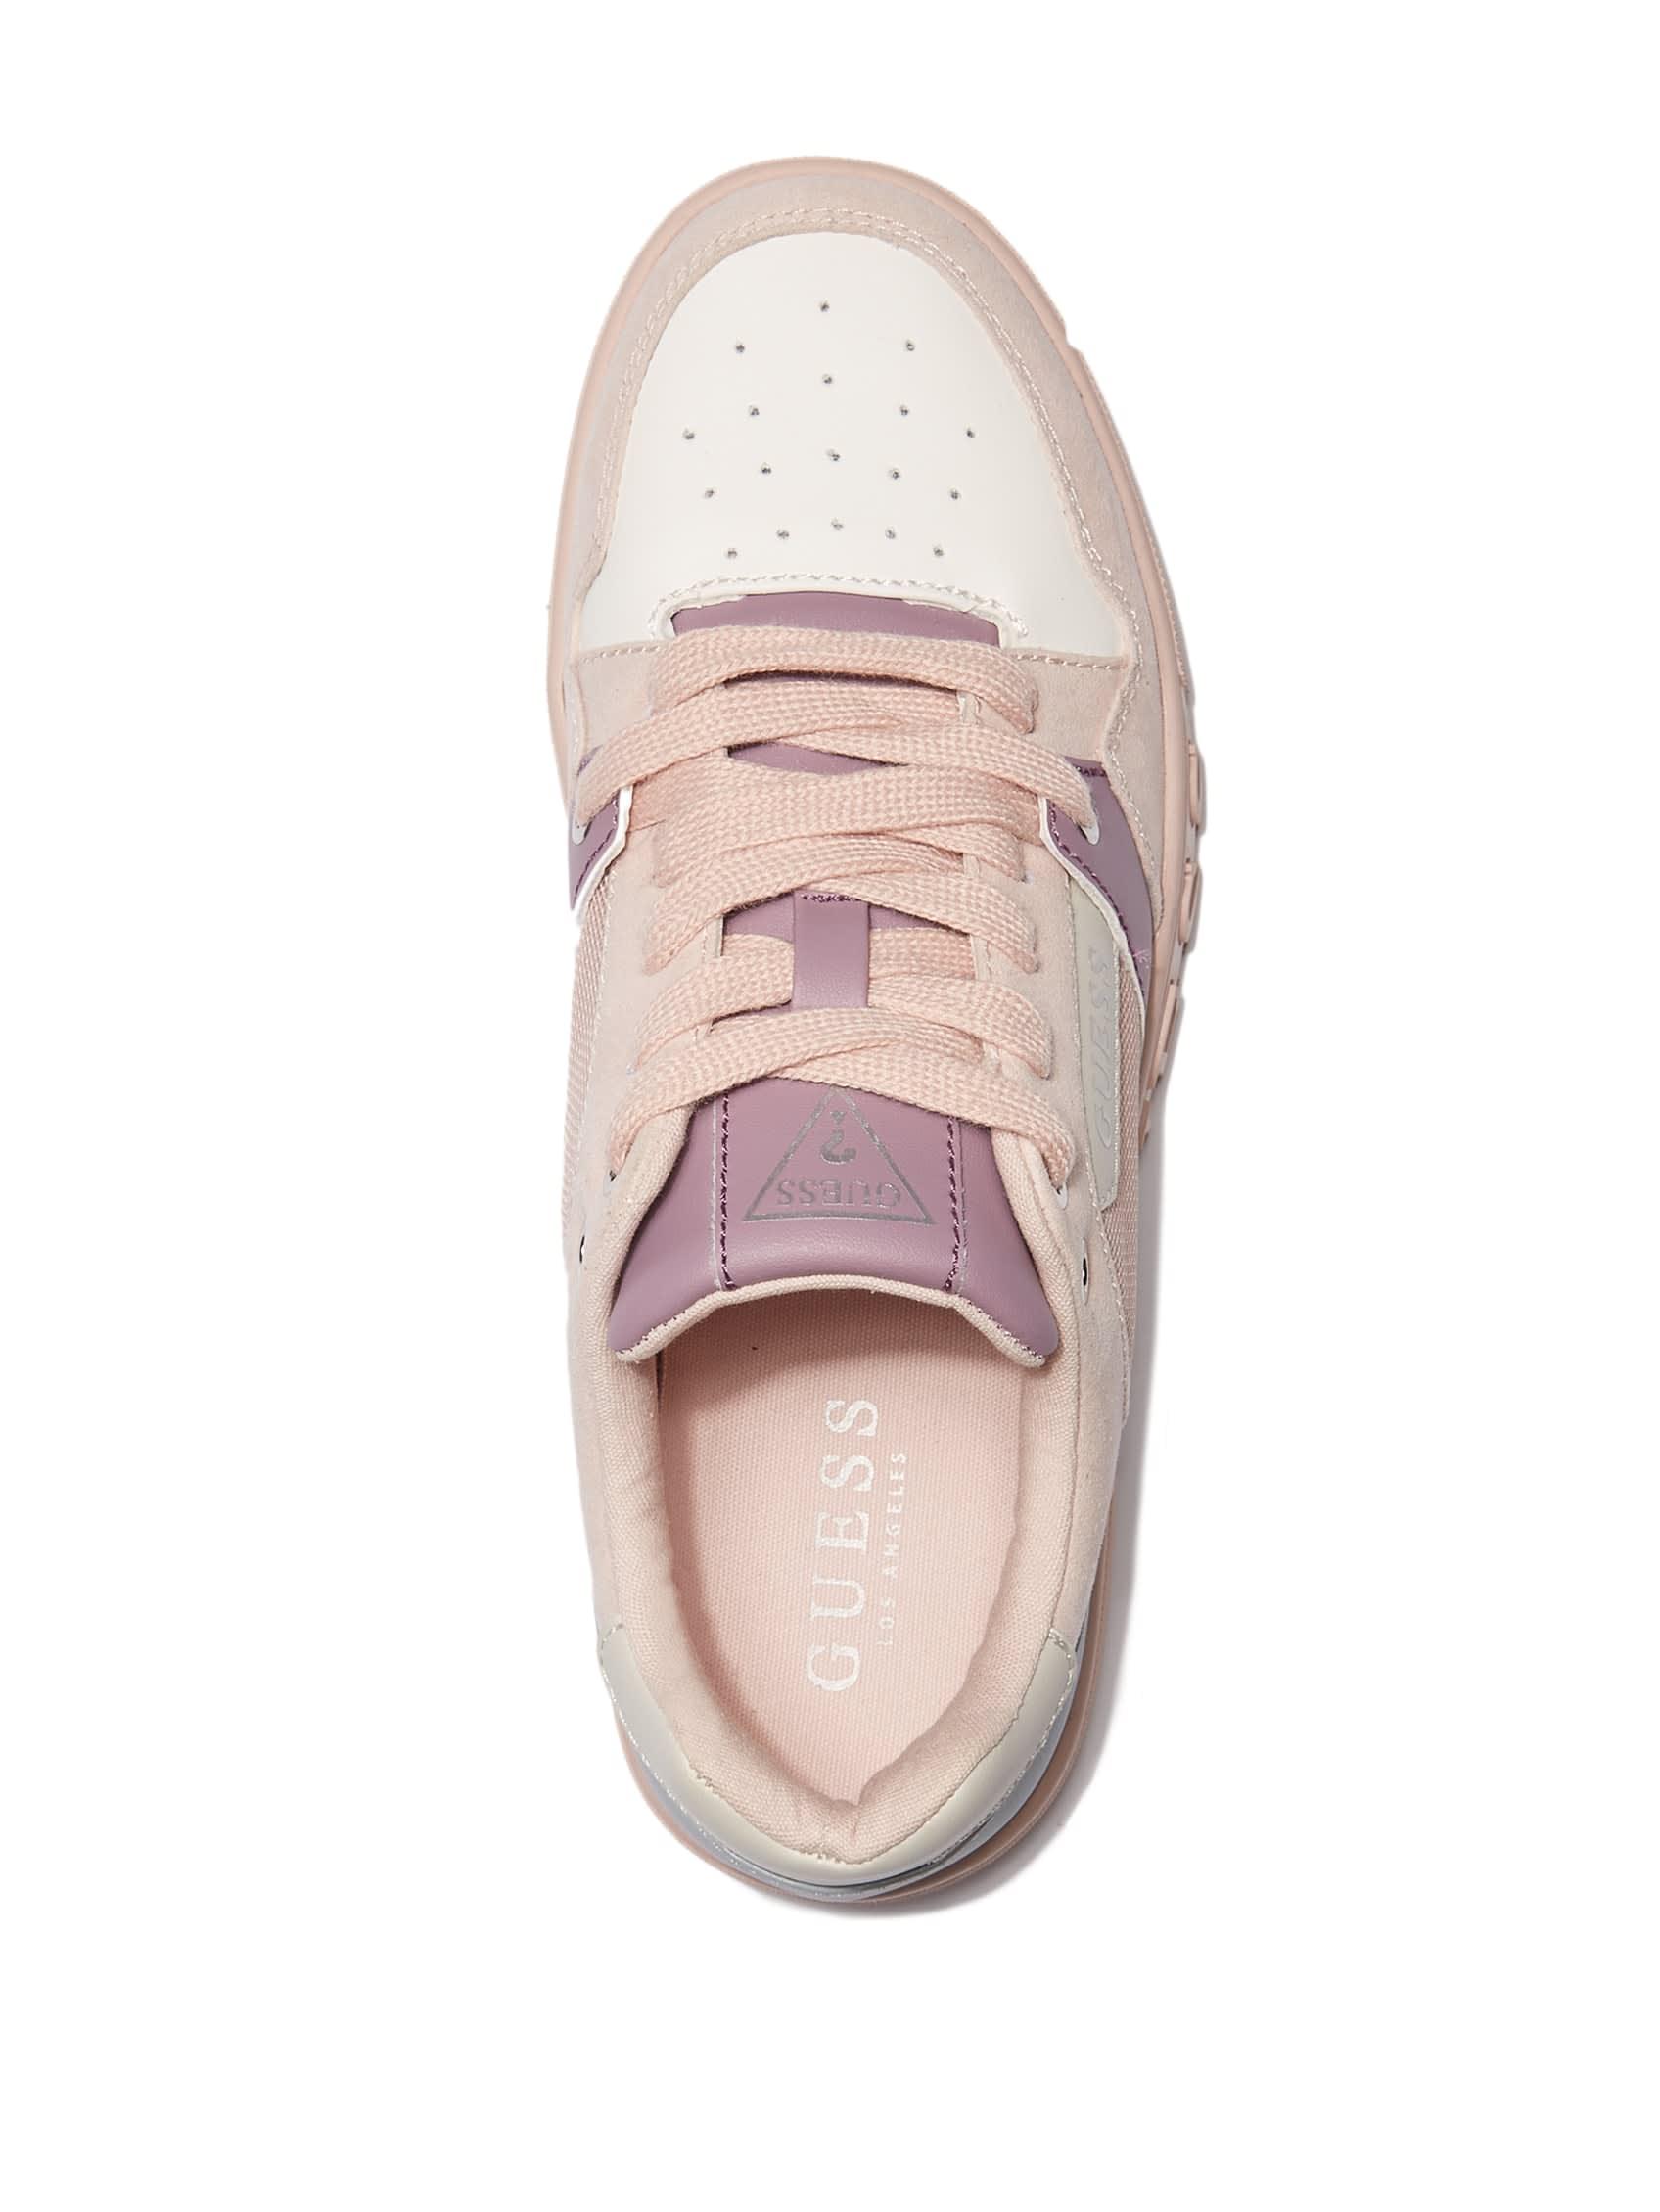 Guess Factory Jetting Color-block Low-top Pink Lyst